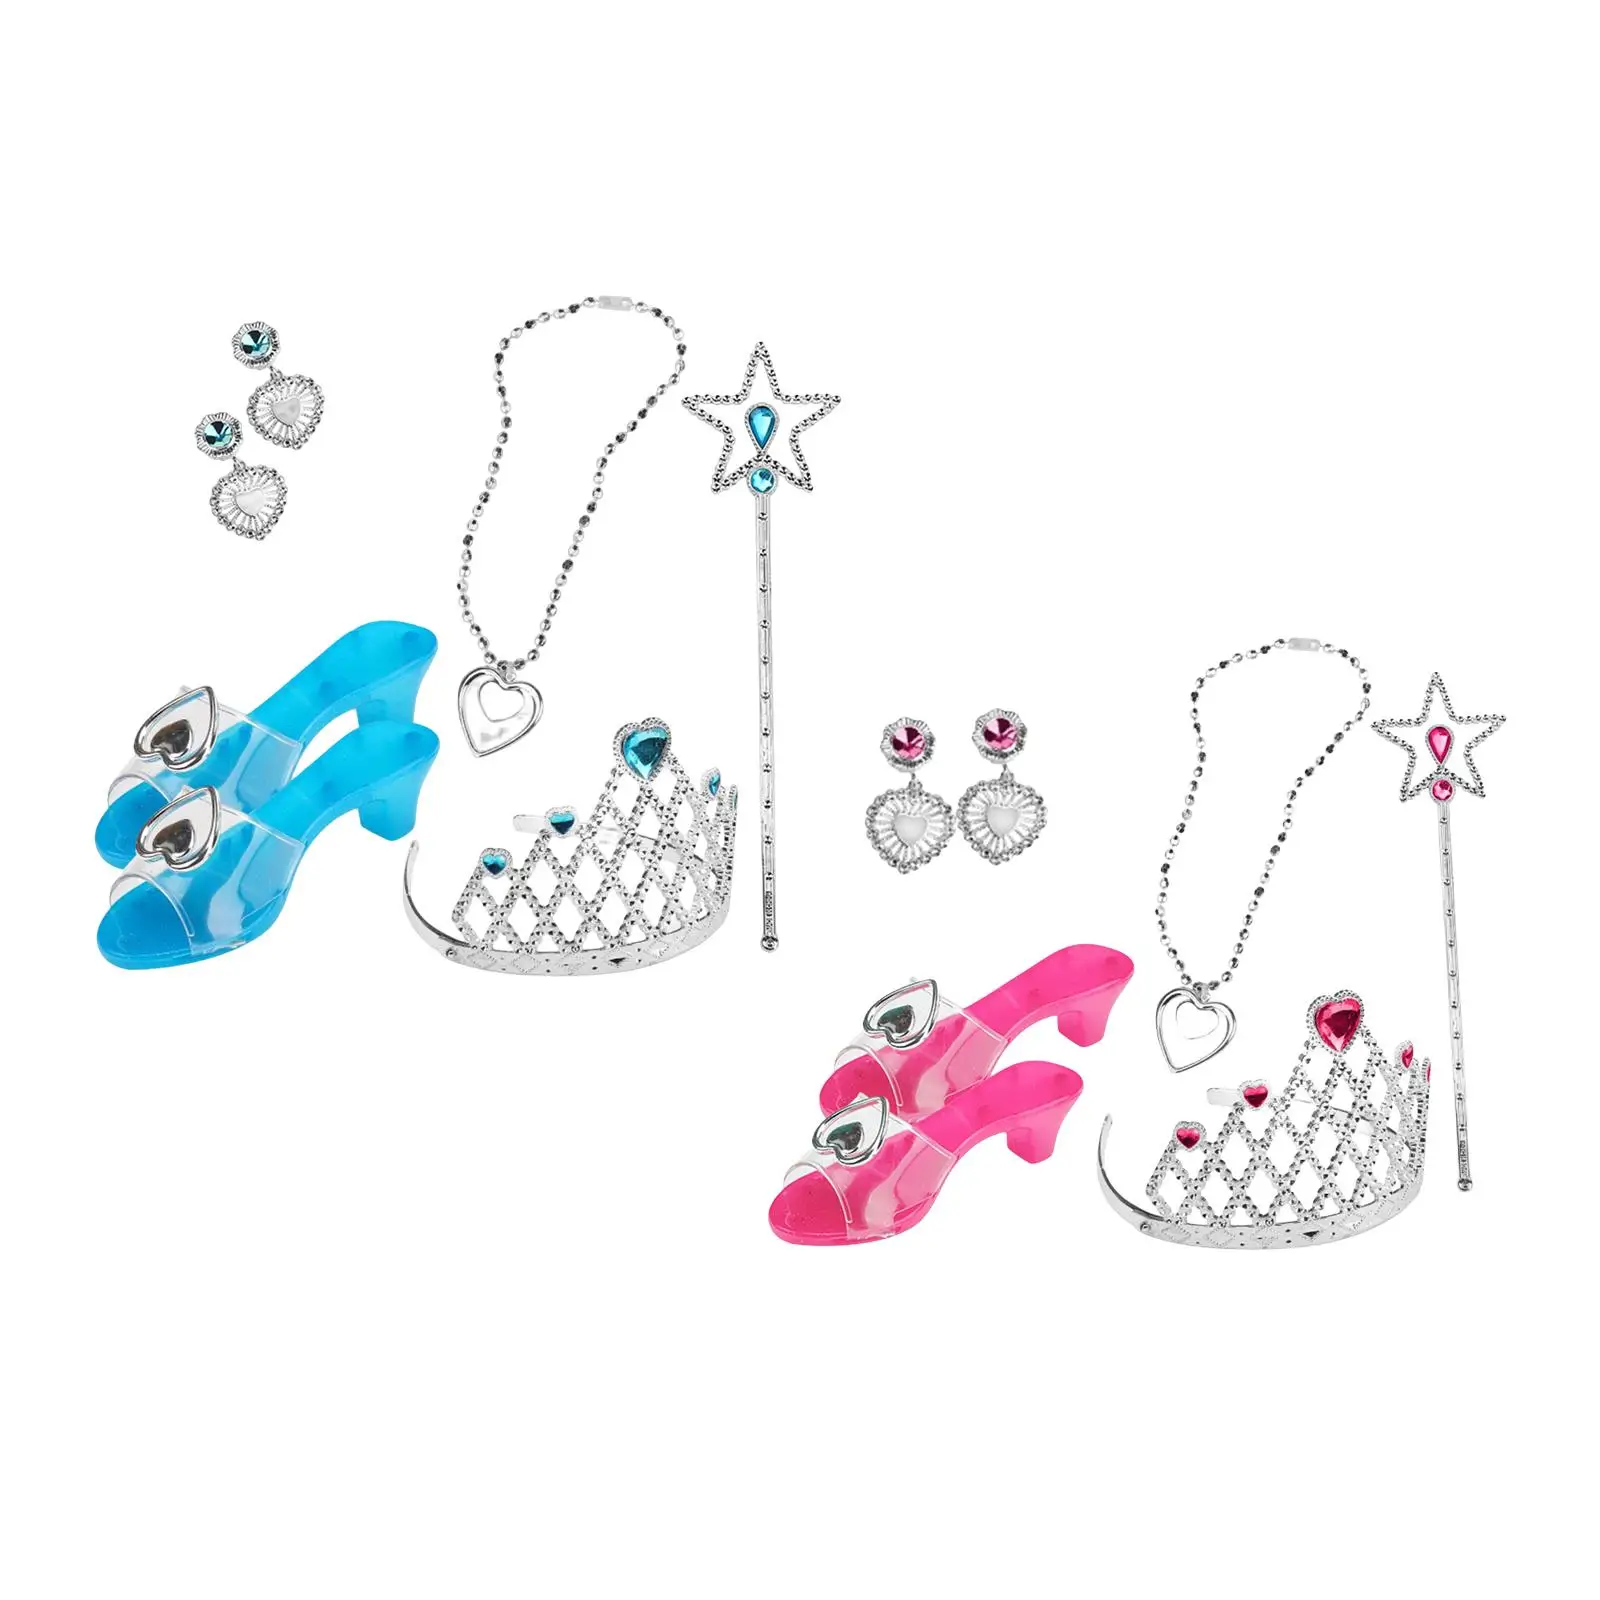 7x Little Girls Jewelry Toy Girls Role Play Set Necklace Girls Pretend Play Set Earrings Princess Dress up for Role Play